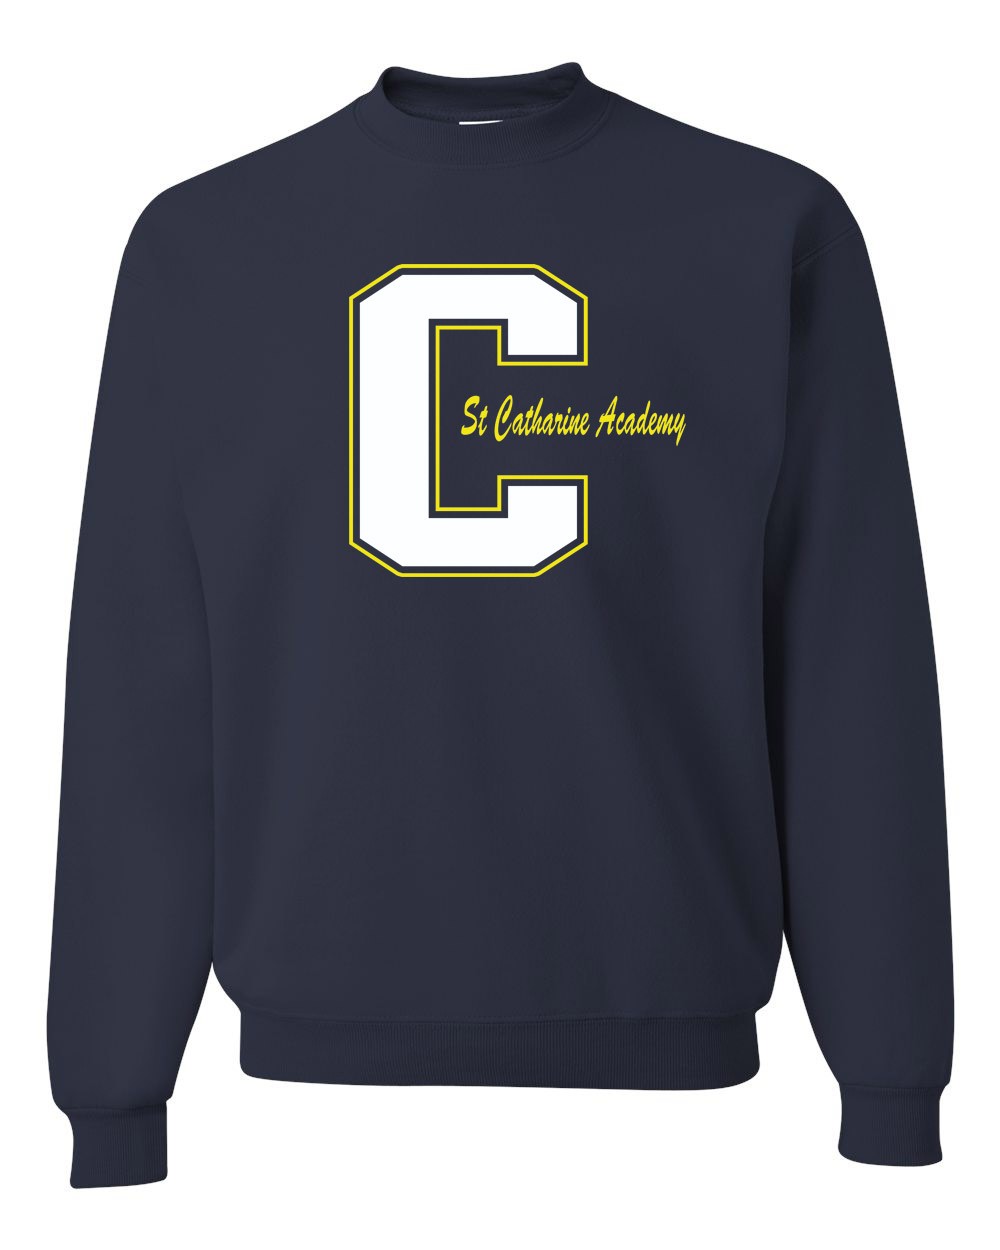 STAFF CAT Sweatshirt w/ Full Front White and Yellow Logo - Please allow 2-3 Weeks for Delivery